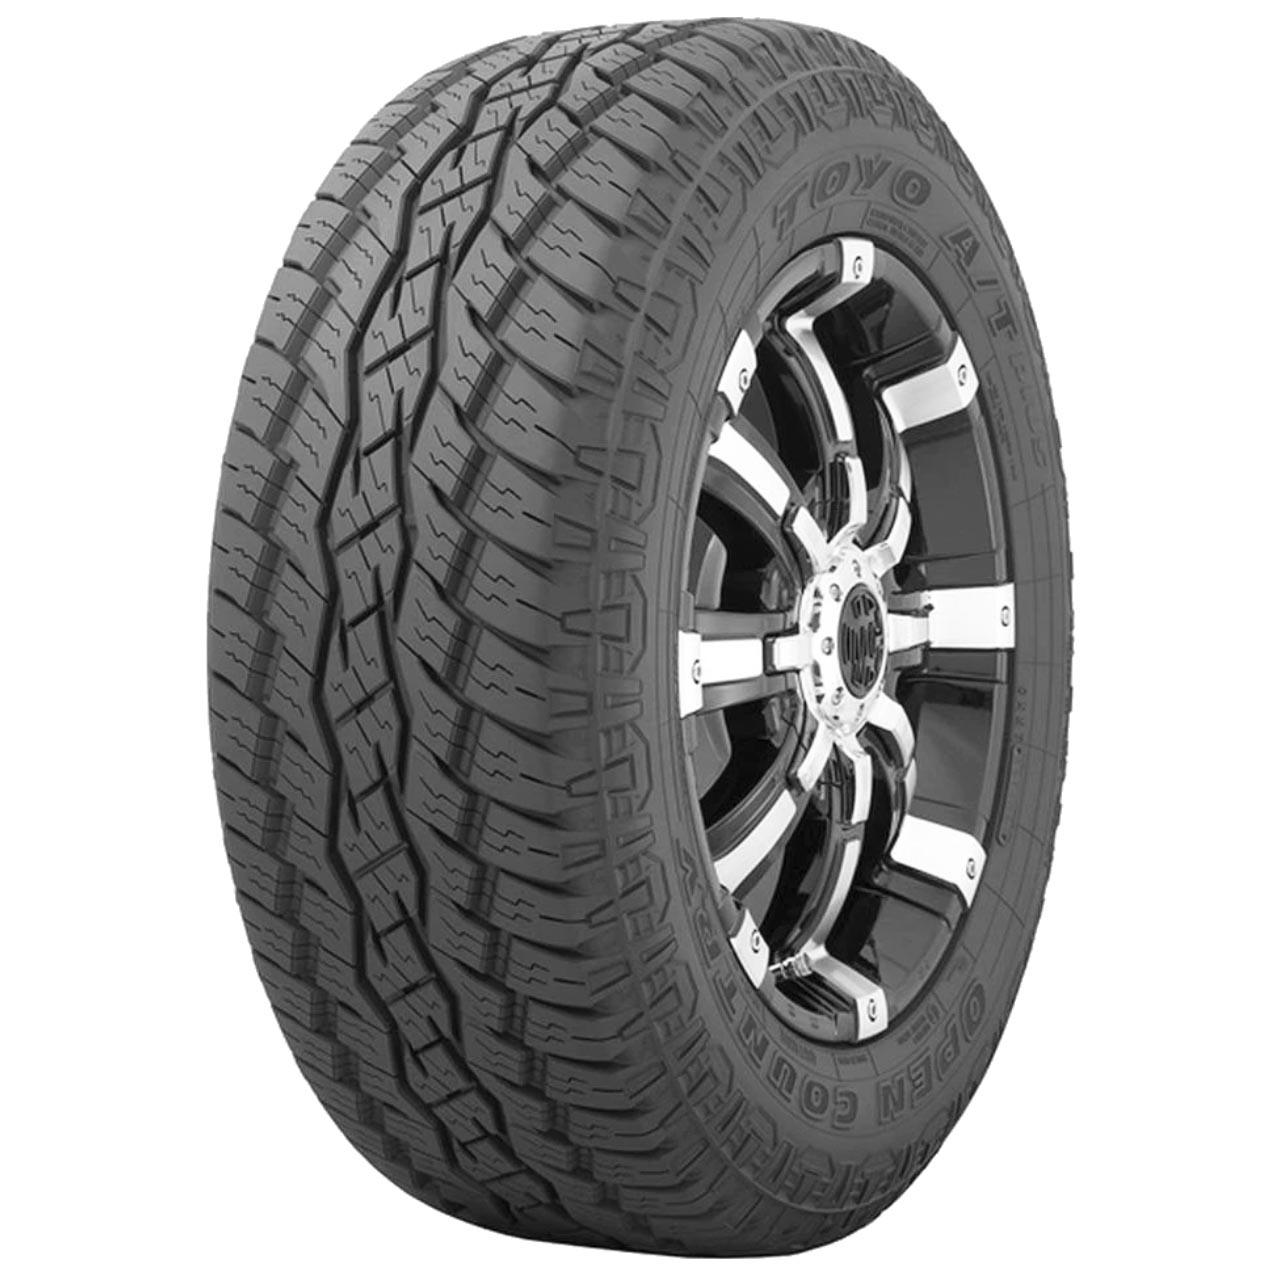 Toyo Open Country AT Plus 225/75R15 102T